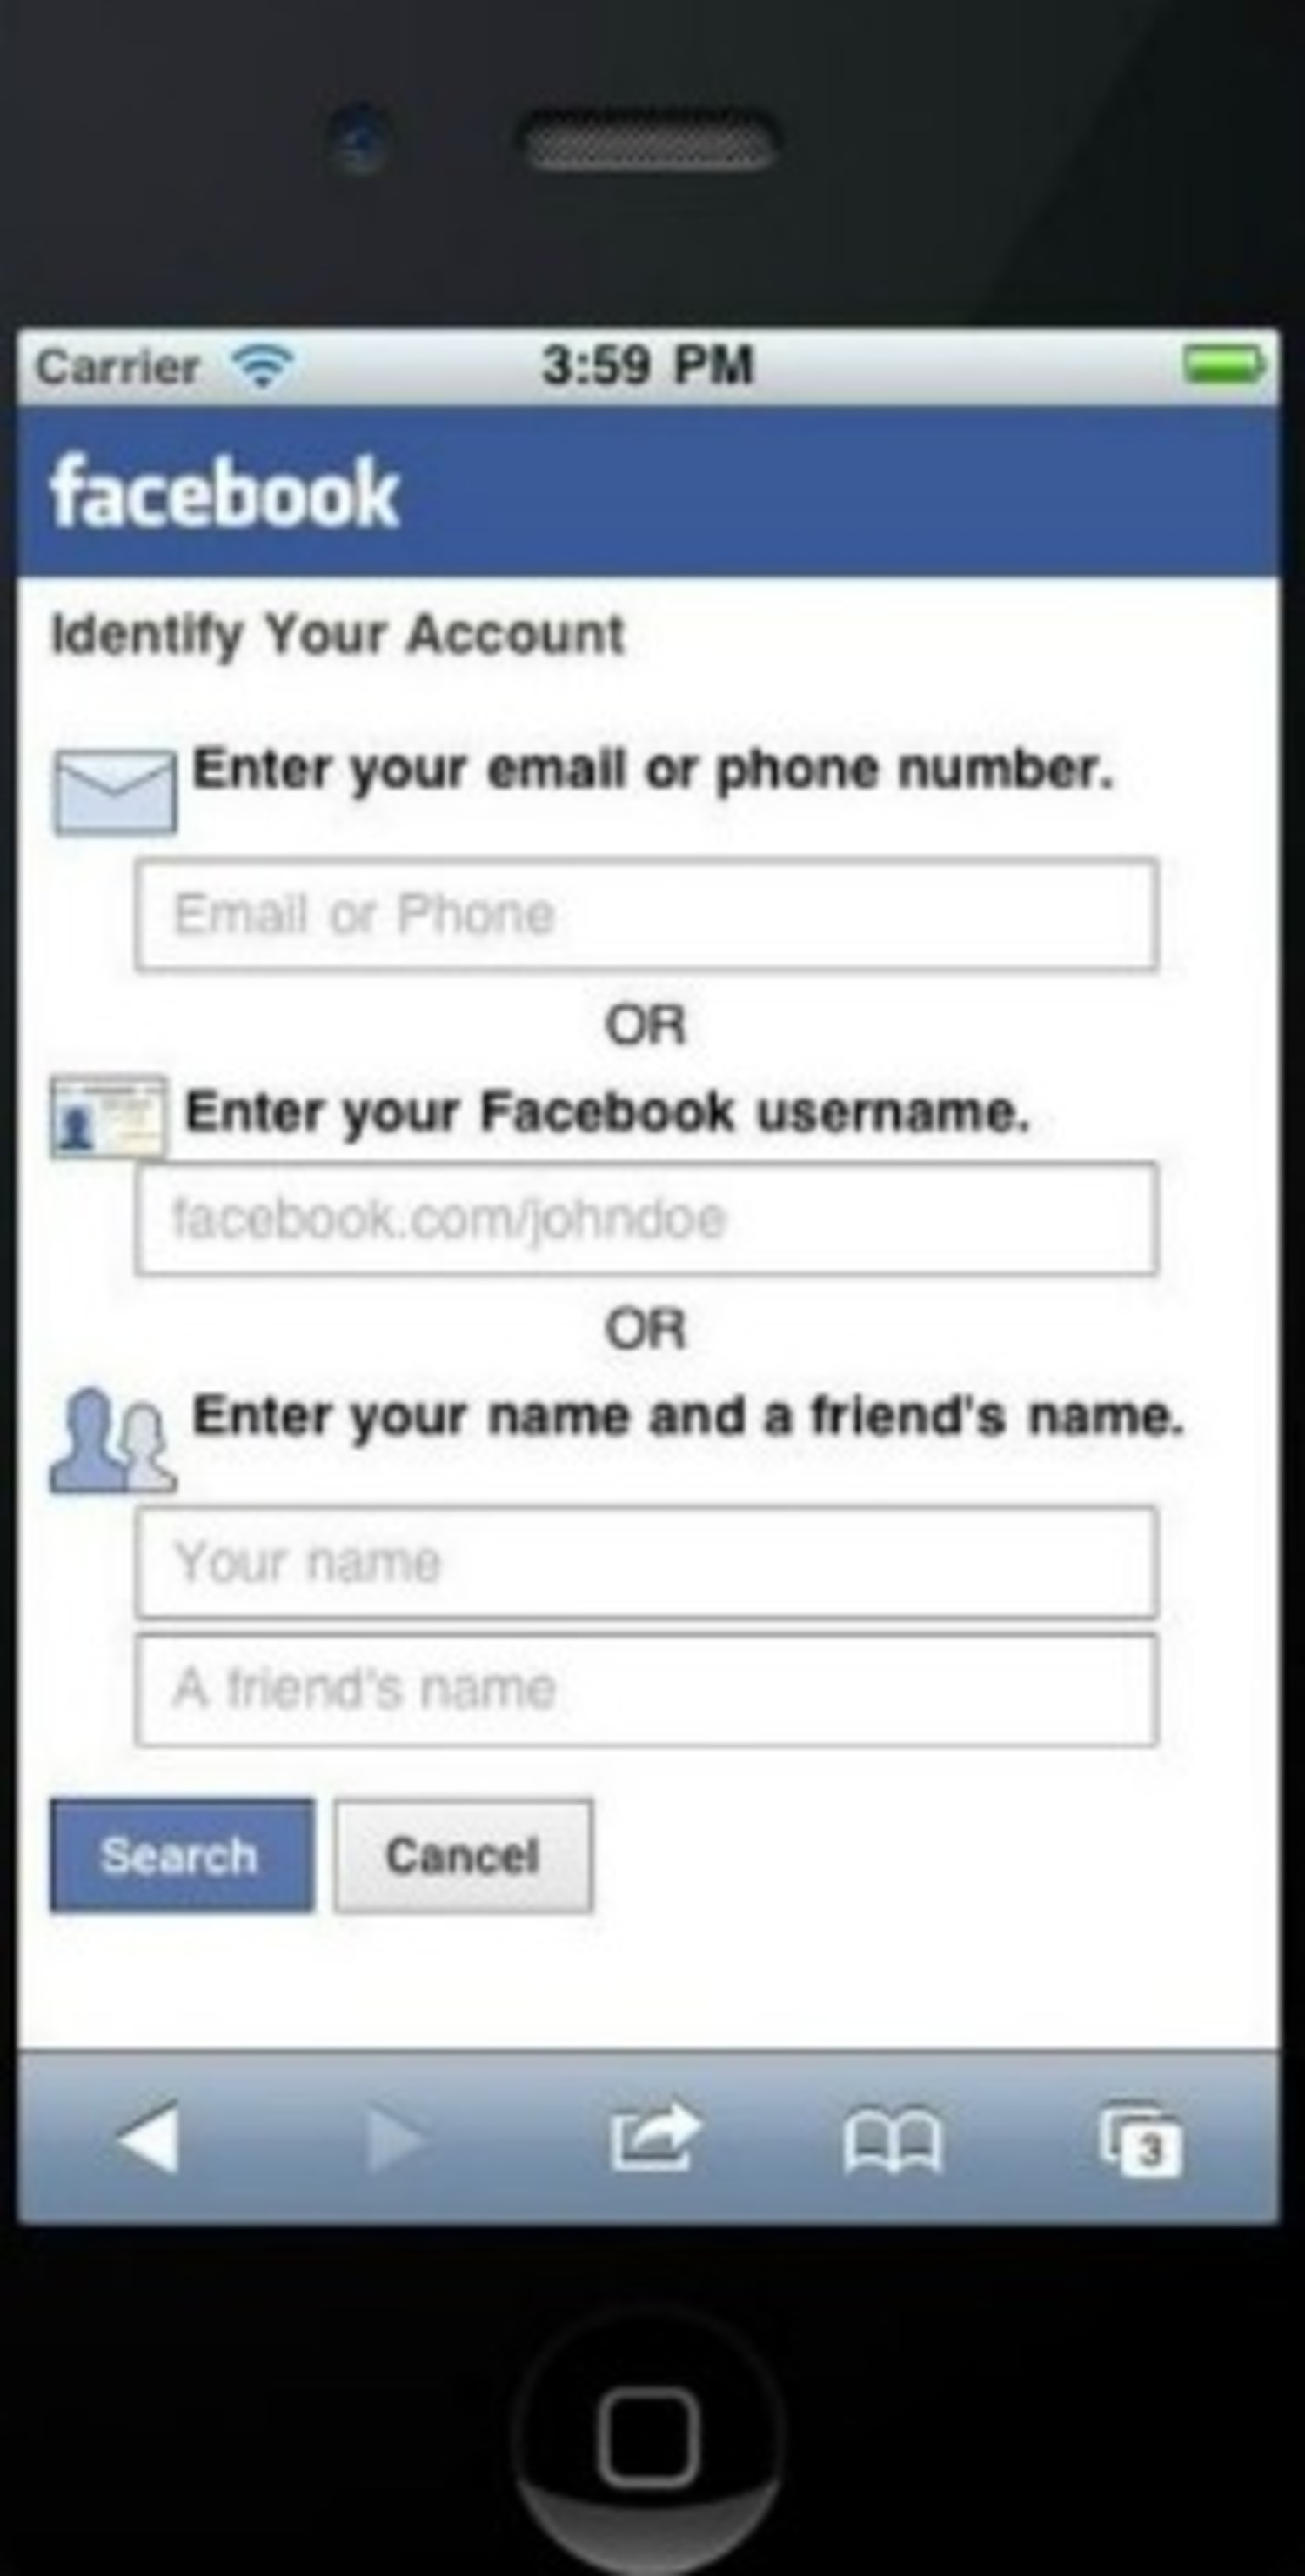 Facebook rolls out Mobile Password Reset